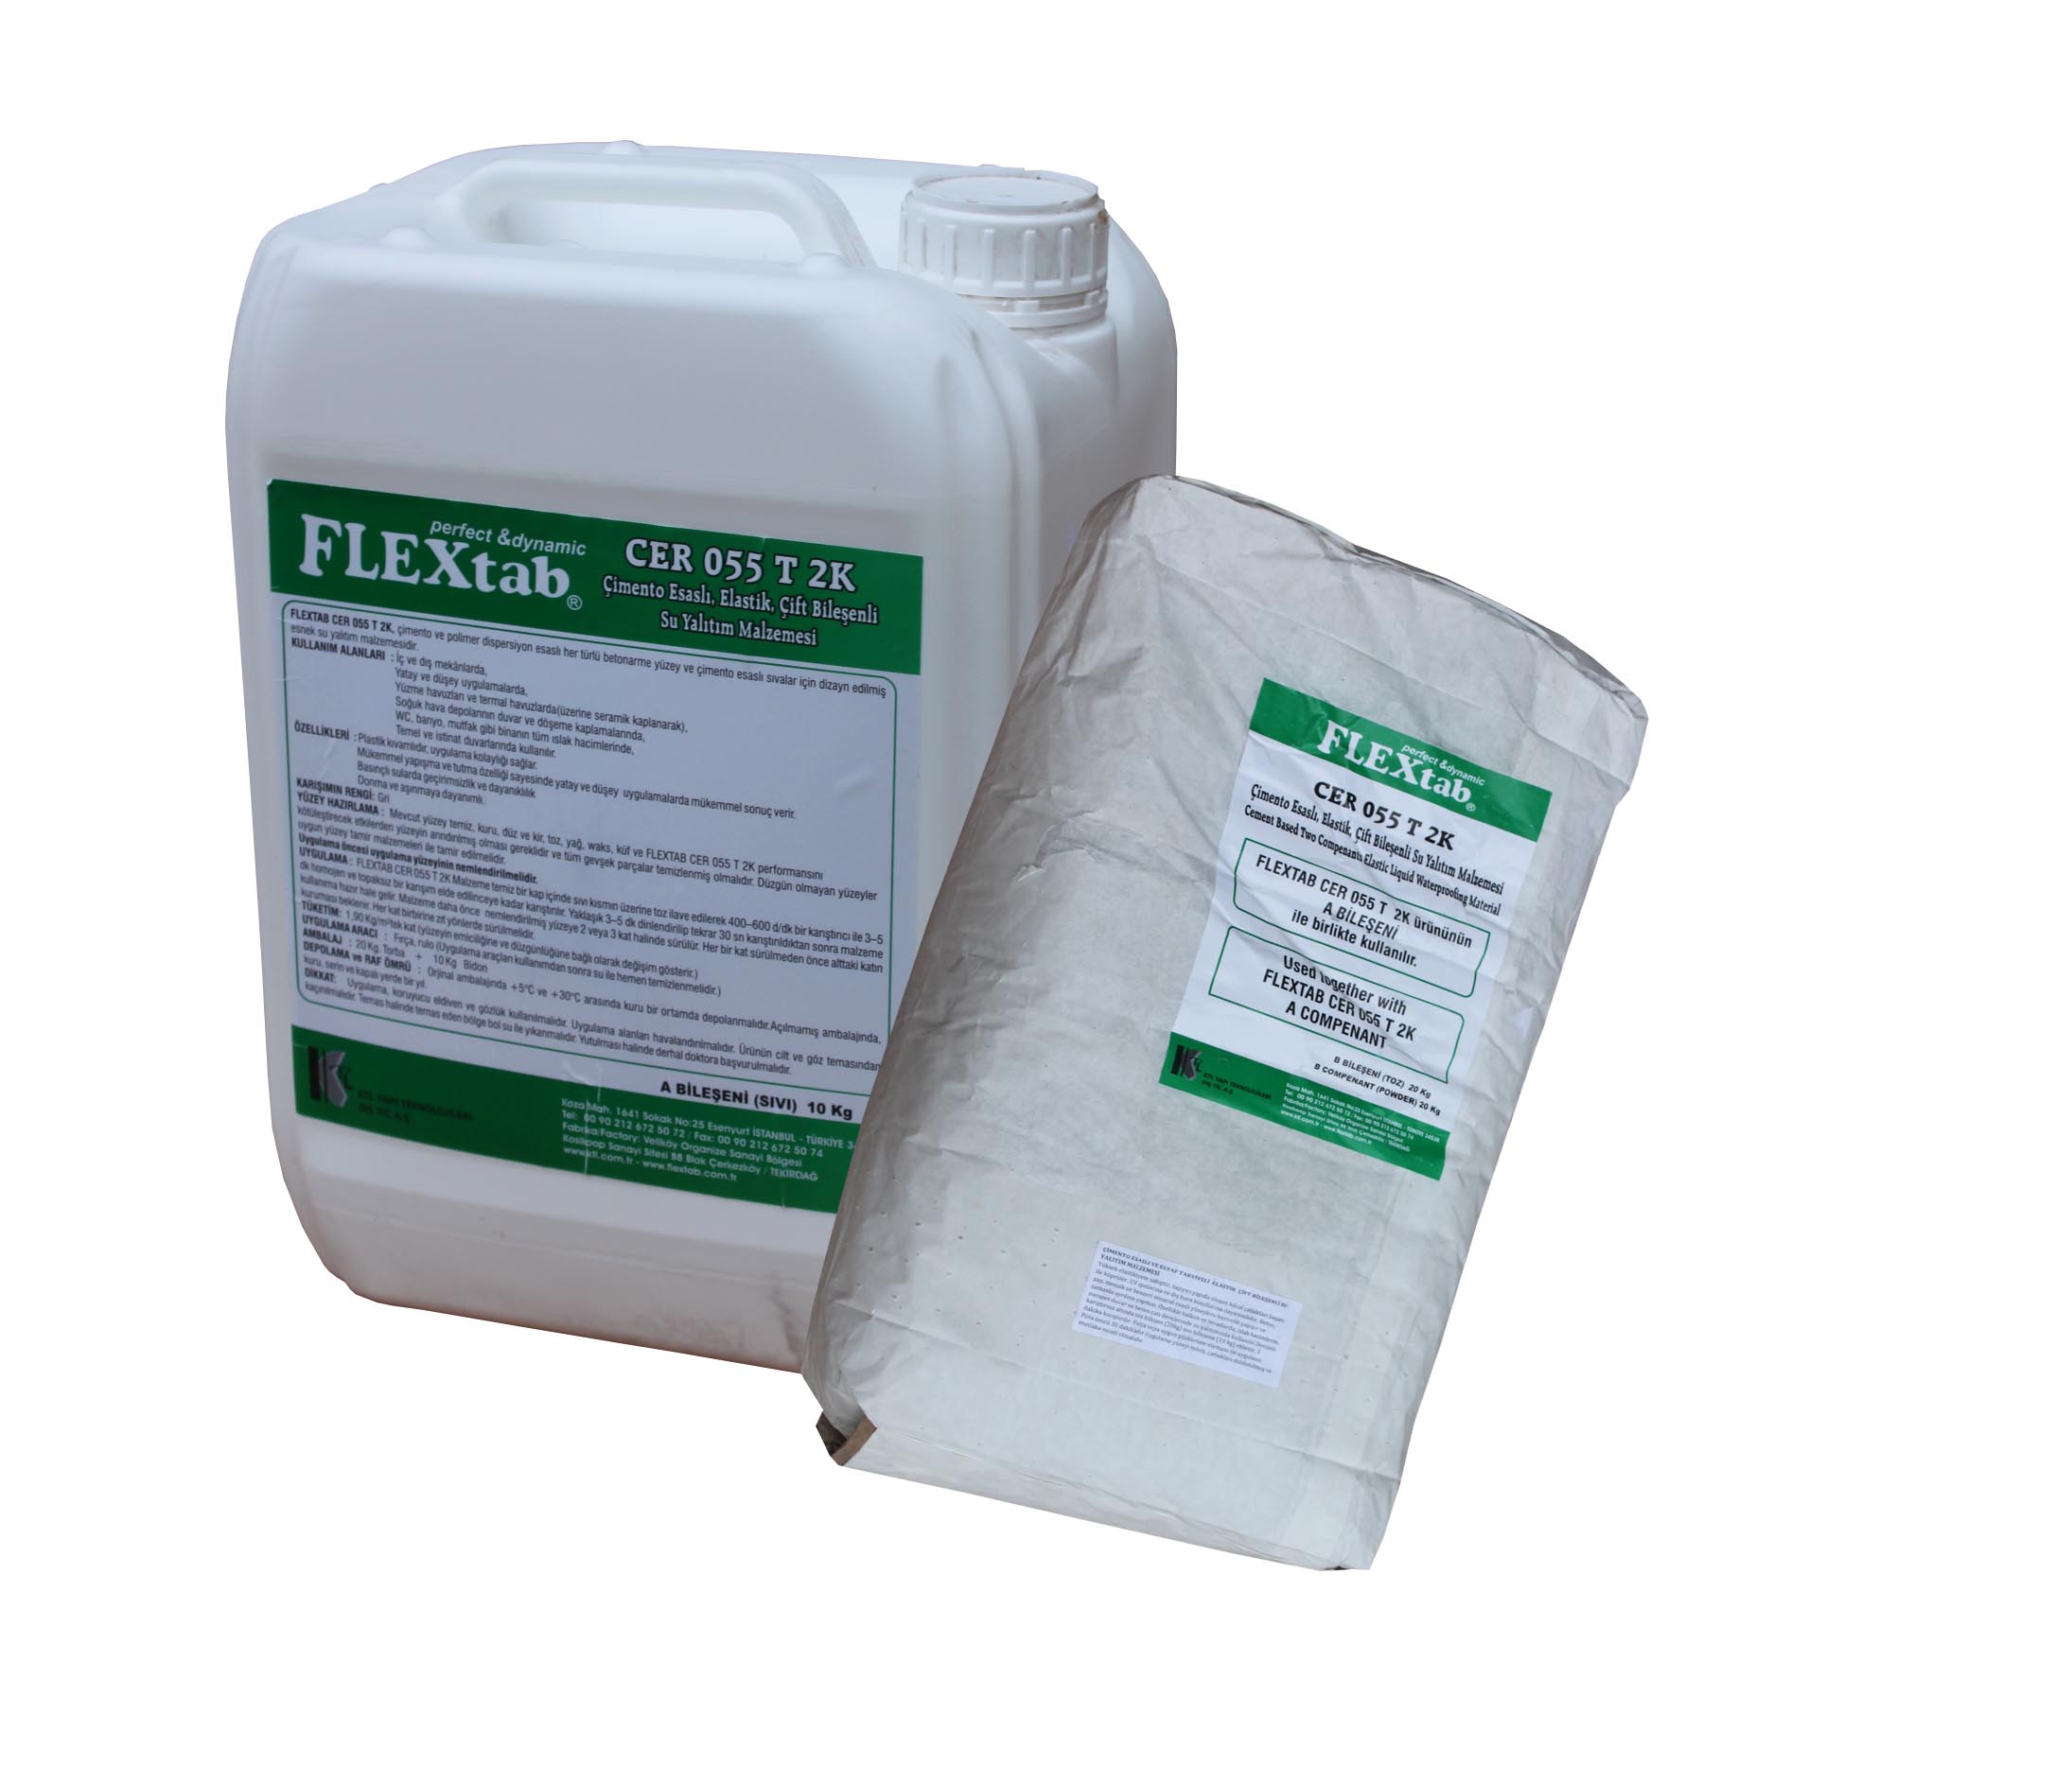 Covering the FLEX2AKNO the elastomeric Based Double Component Water Insulation Material